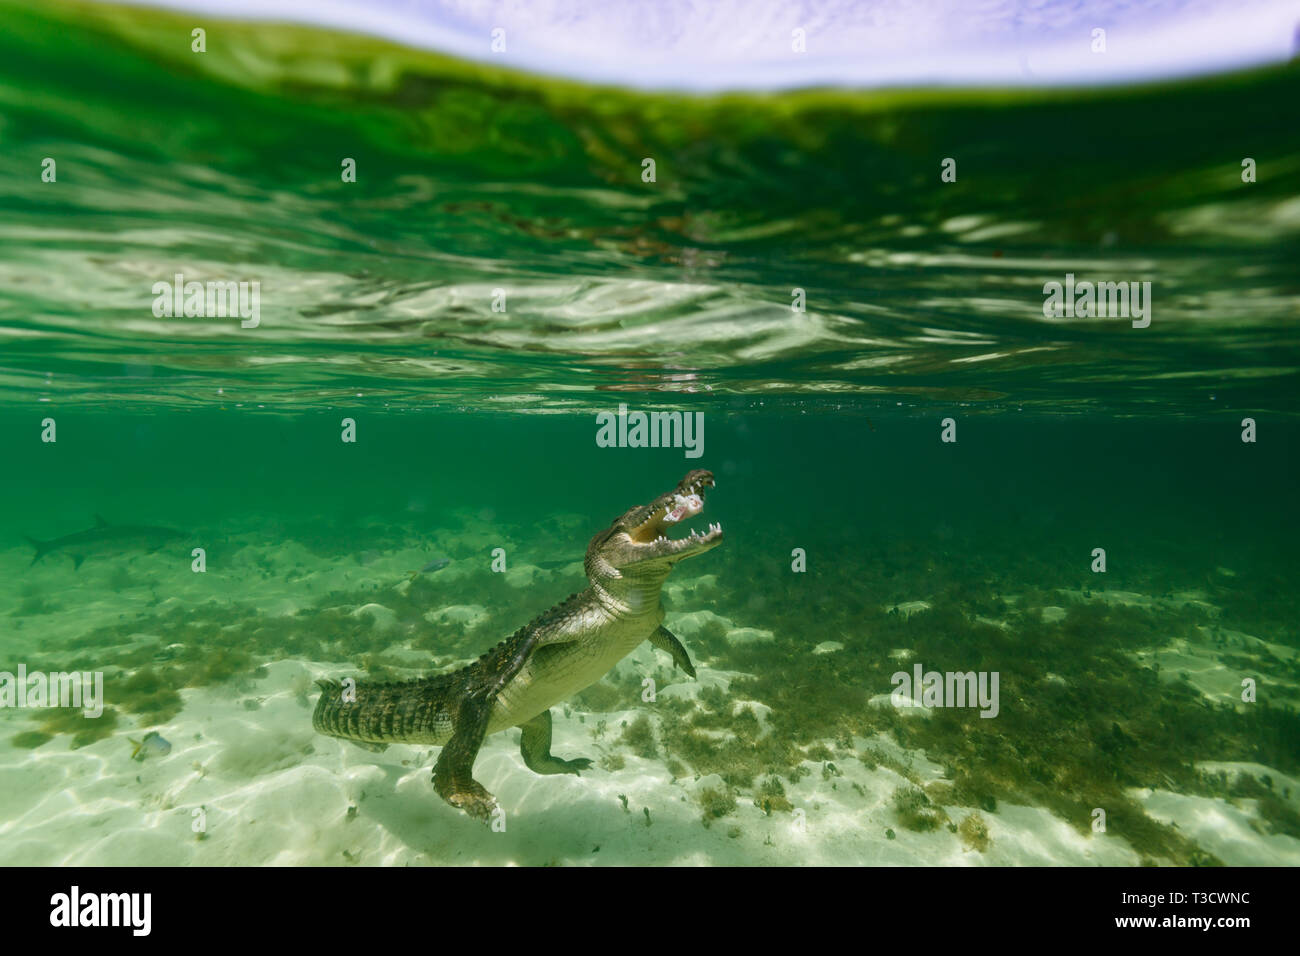 Closeup of an American crocodile, Crocodylus acutus, jaw open, underwater, front feet off the ground, tail swishing, swimming straight up off the ocea Stock Photo